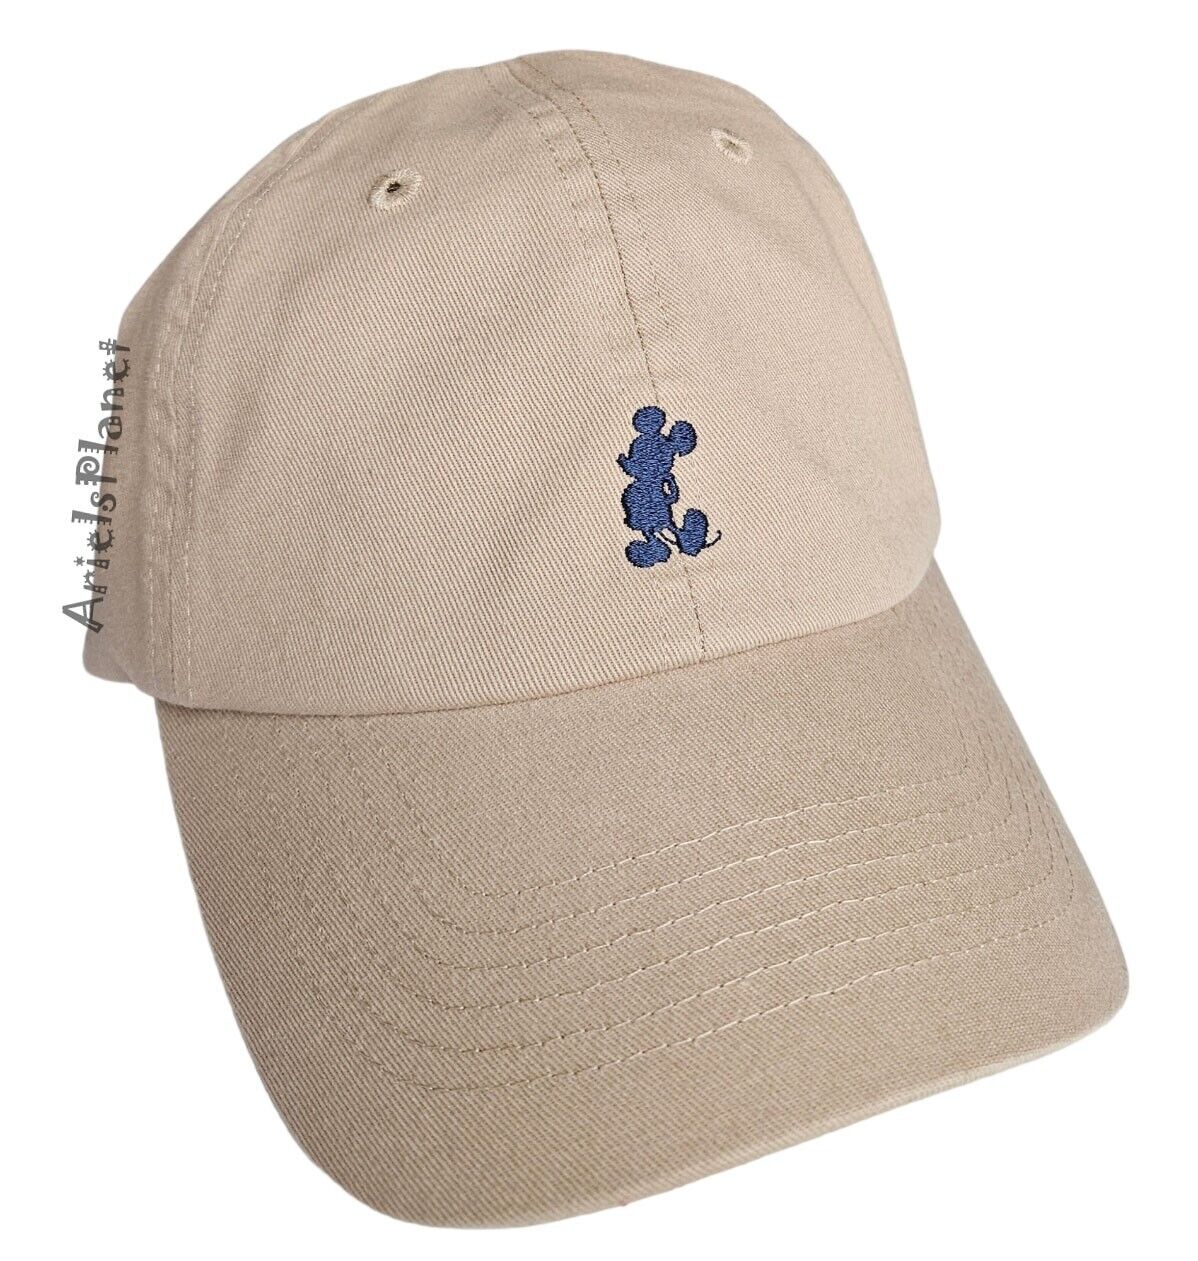 Disney Parks Mickey Mouse Strap Back Embroidered Adult Baseball Hat Cap - Beige